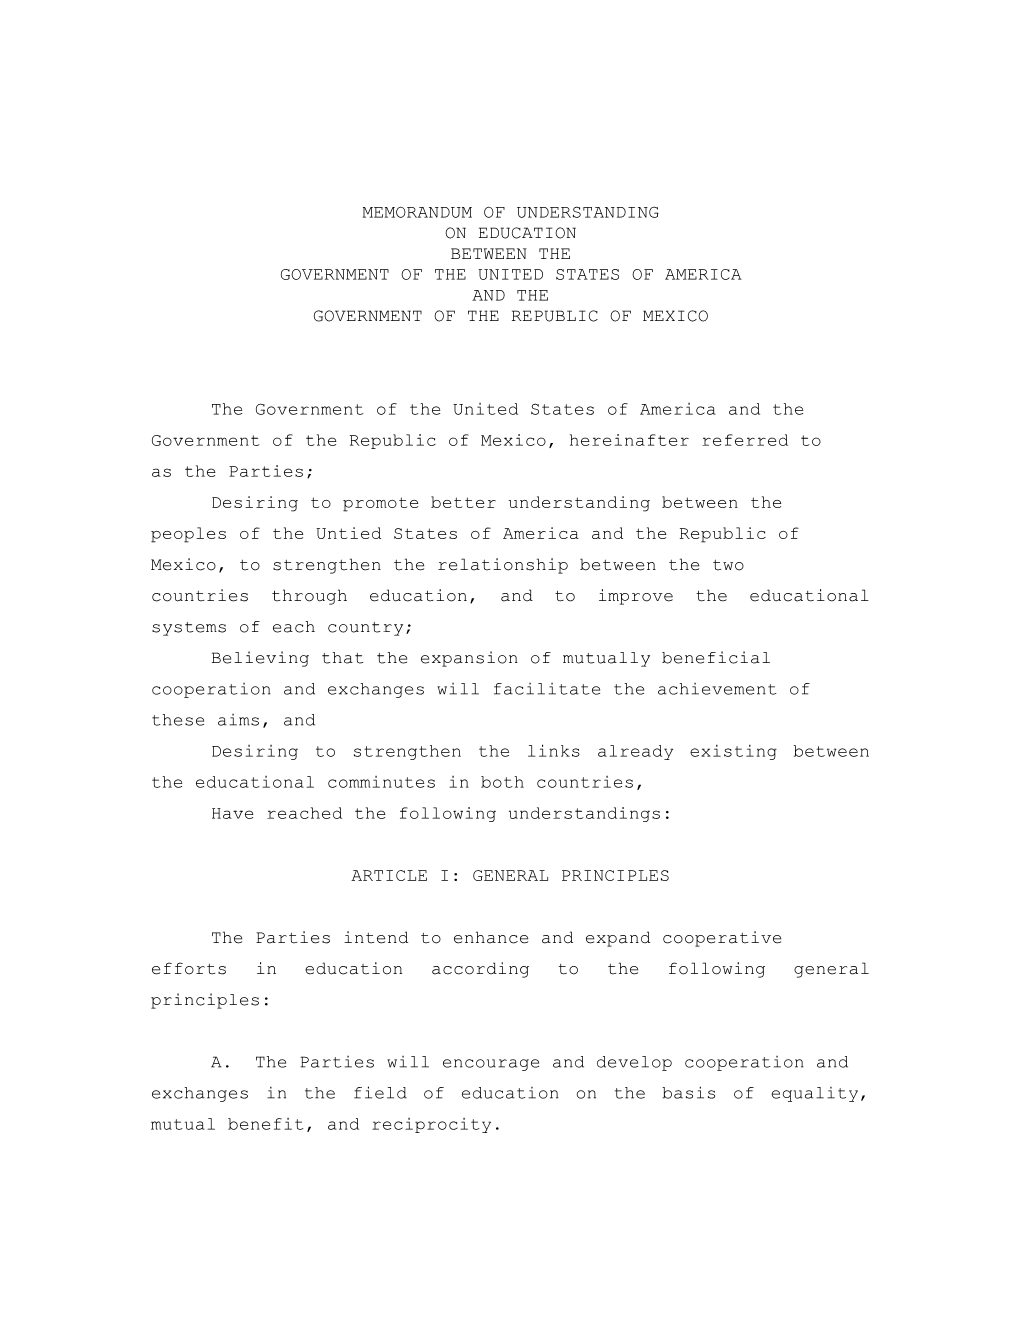 Memorandum of Understanding on Education Between the Government of the United States Of